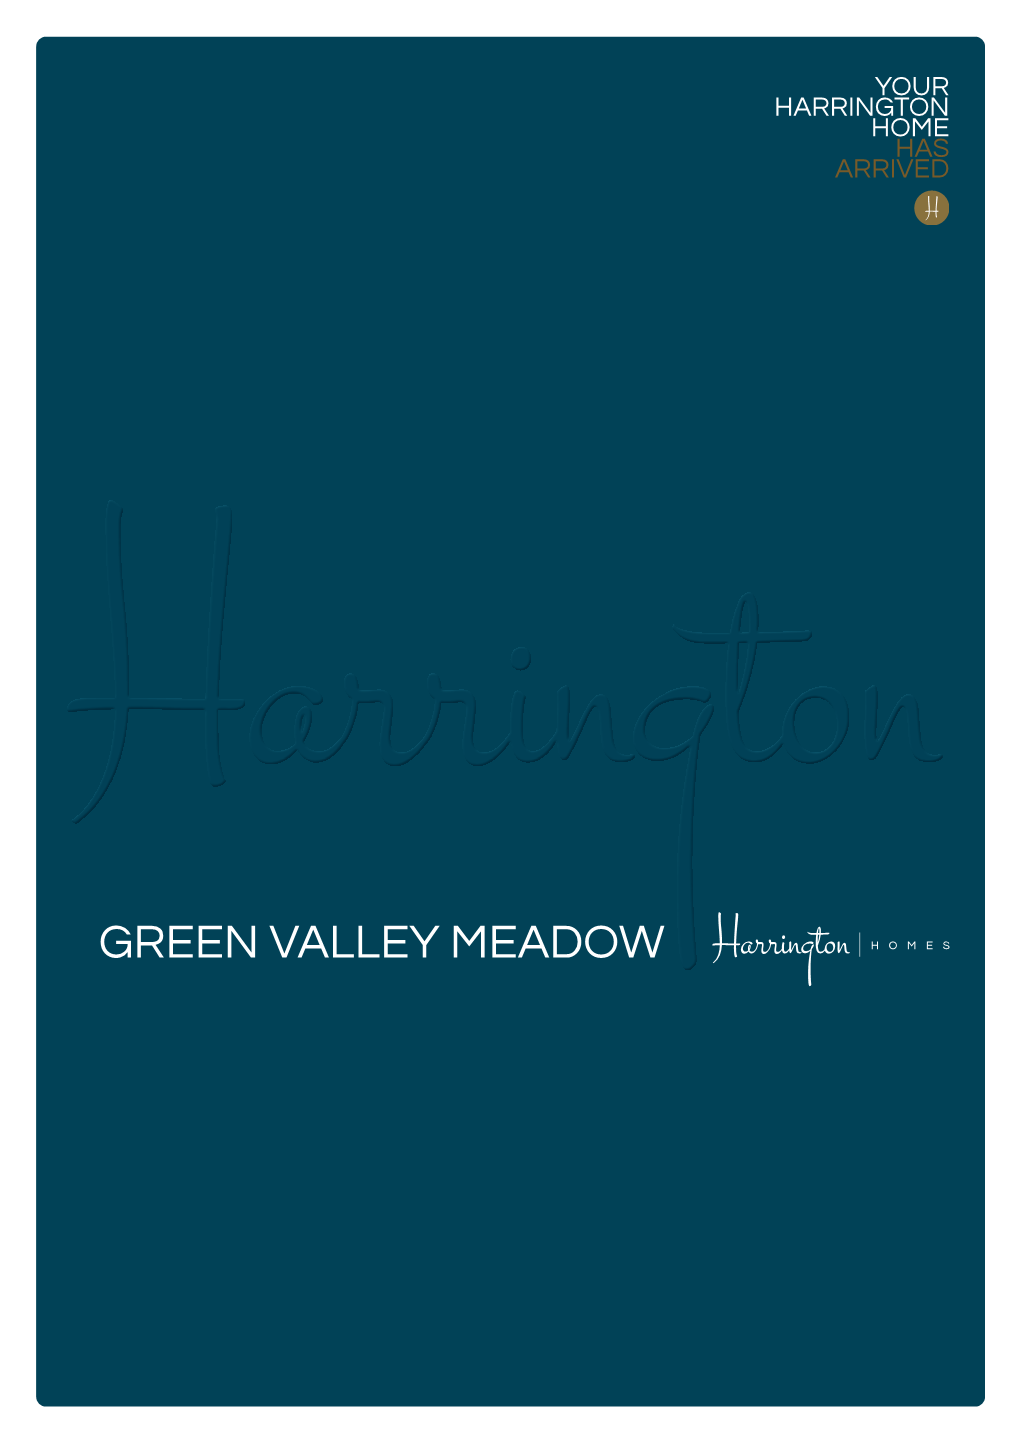 Green Valley Meadow